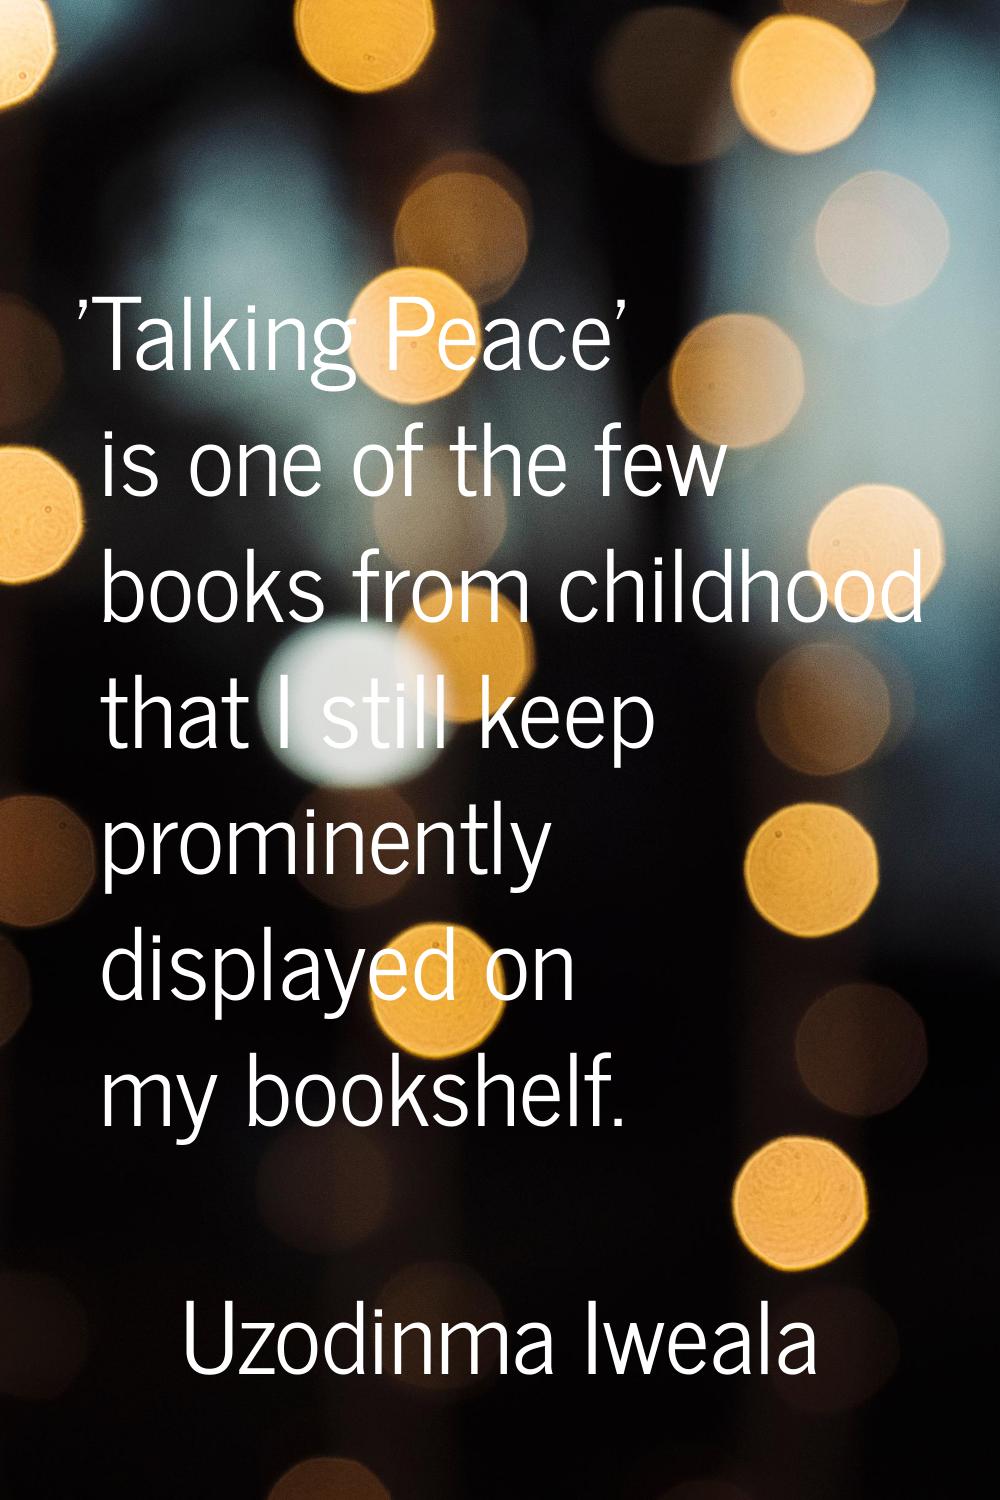 'Talking Peace' is one of the few books from childhood that I still keep prominently displayed on m